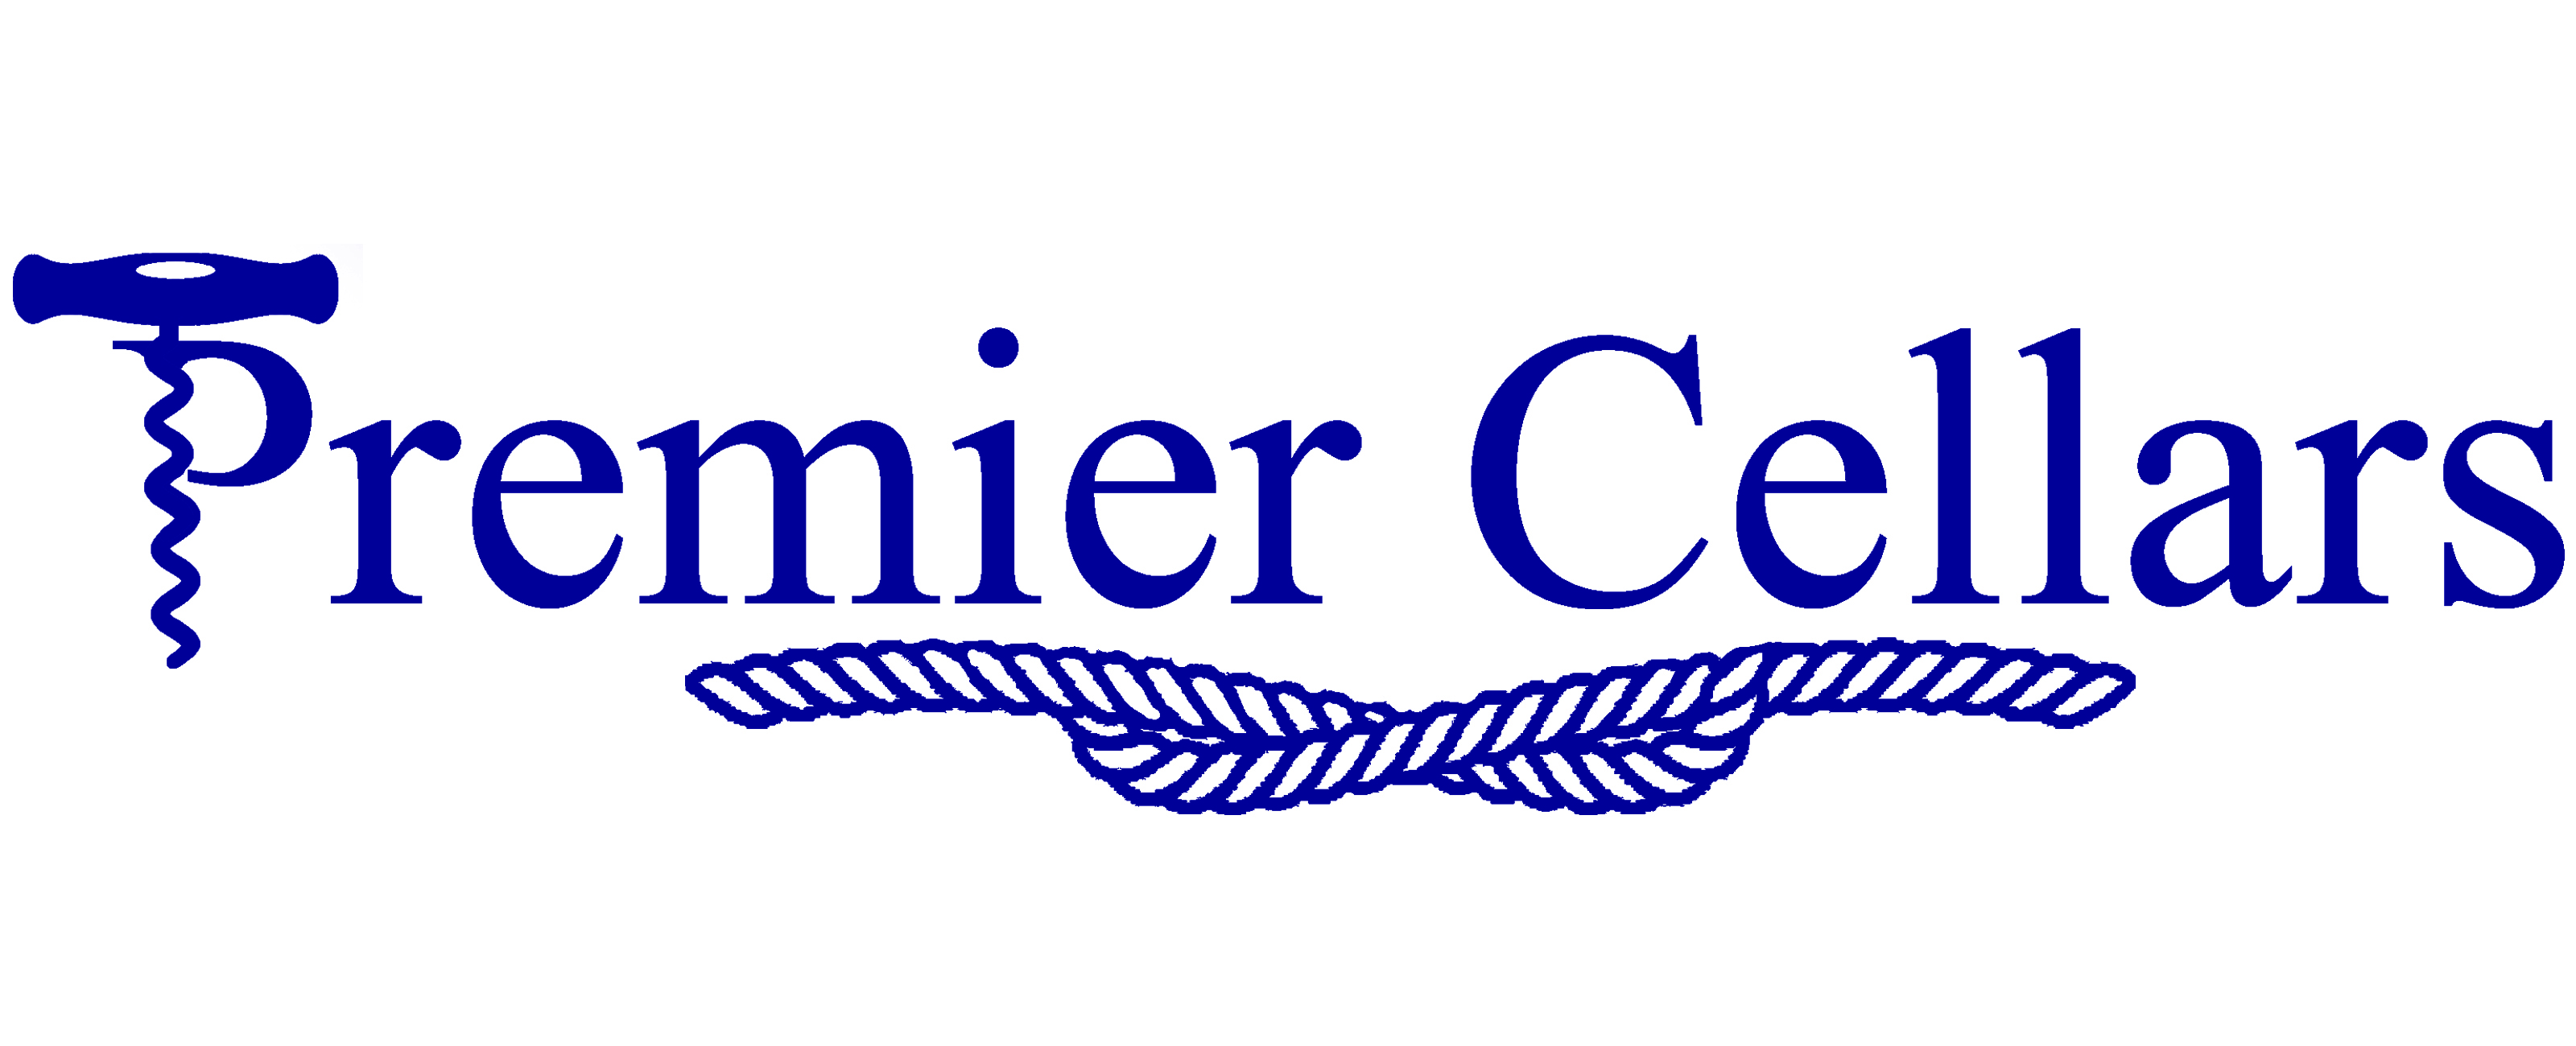 Premier Cellars is your global partner and curator of fine wines.